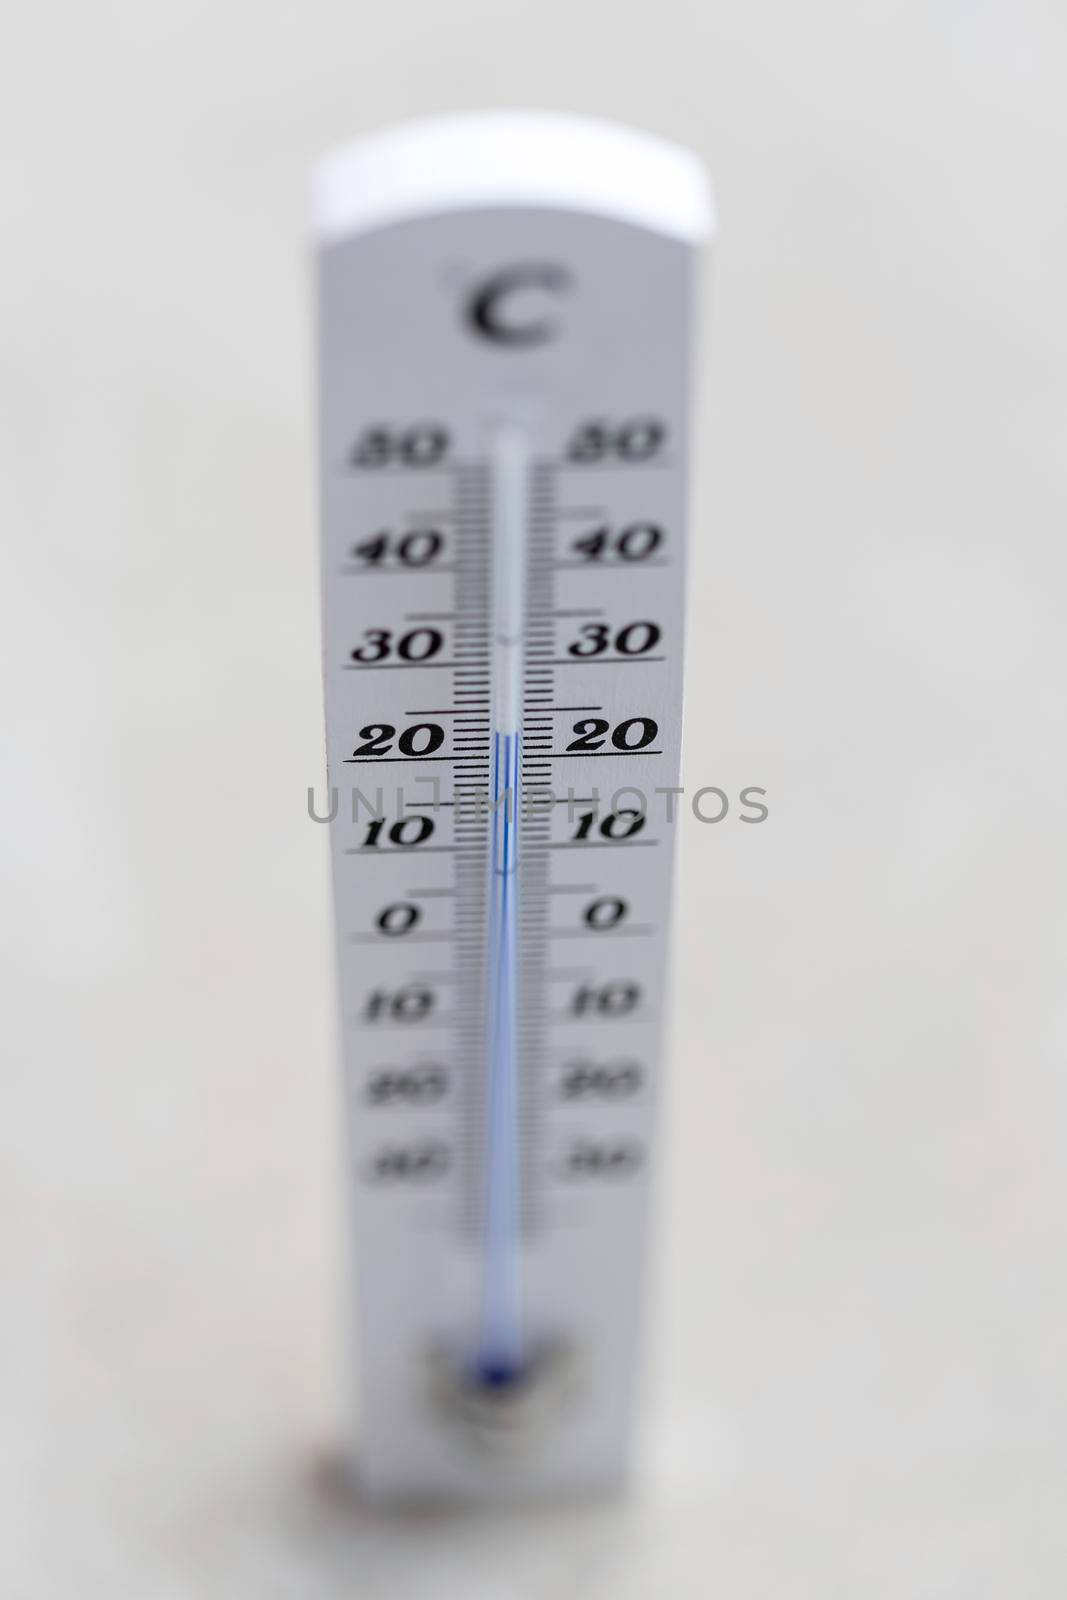 Heatwave: Thermometer lying on the concrete floor by Daxenbichler